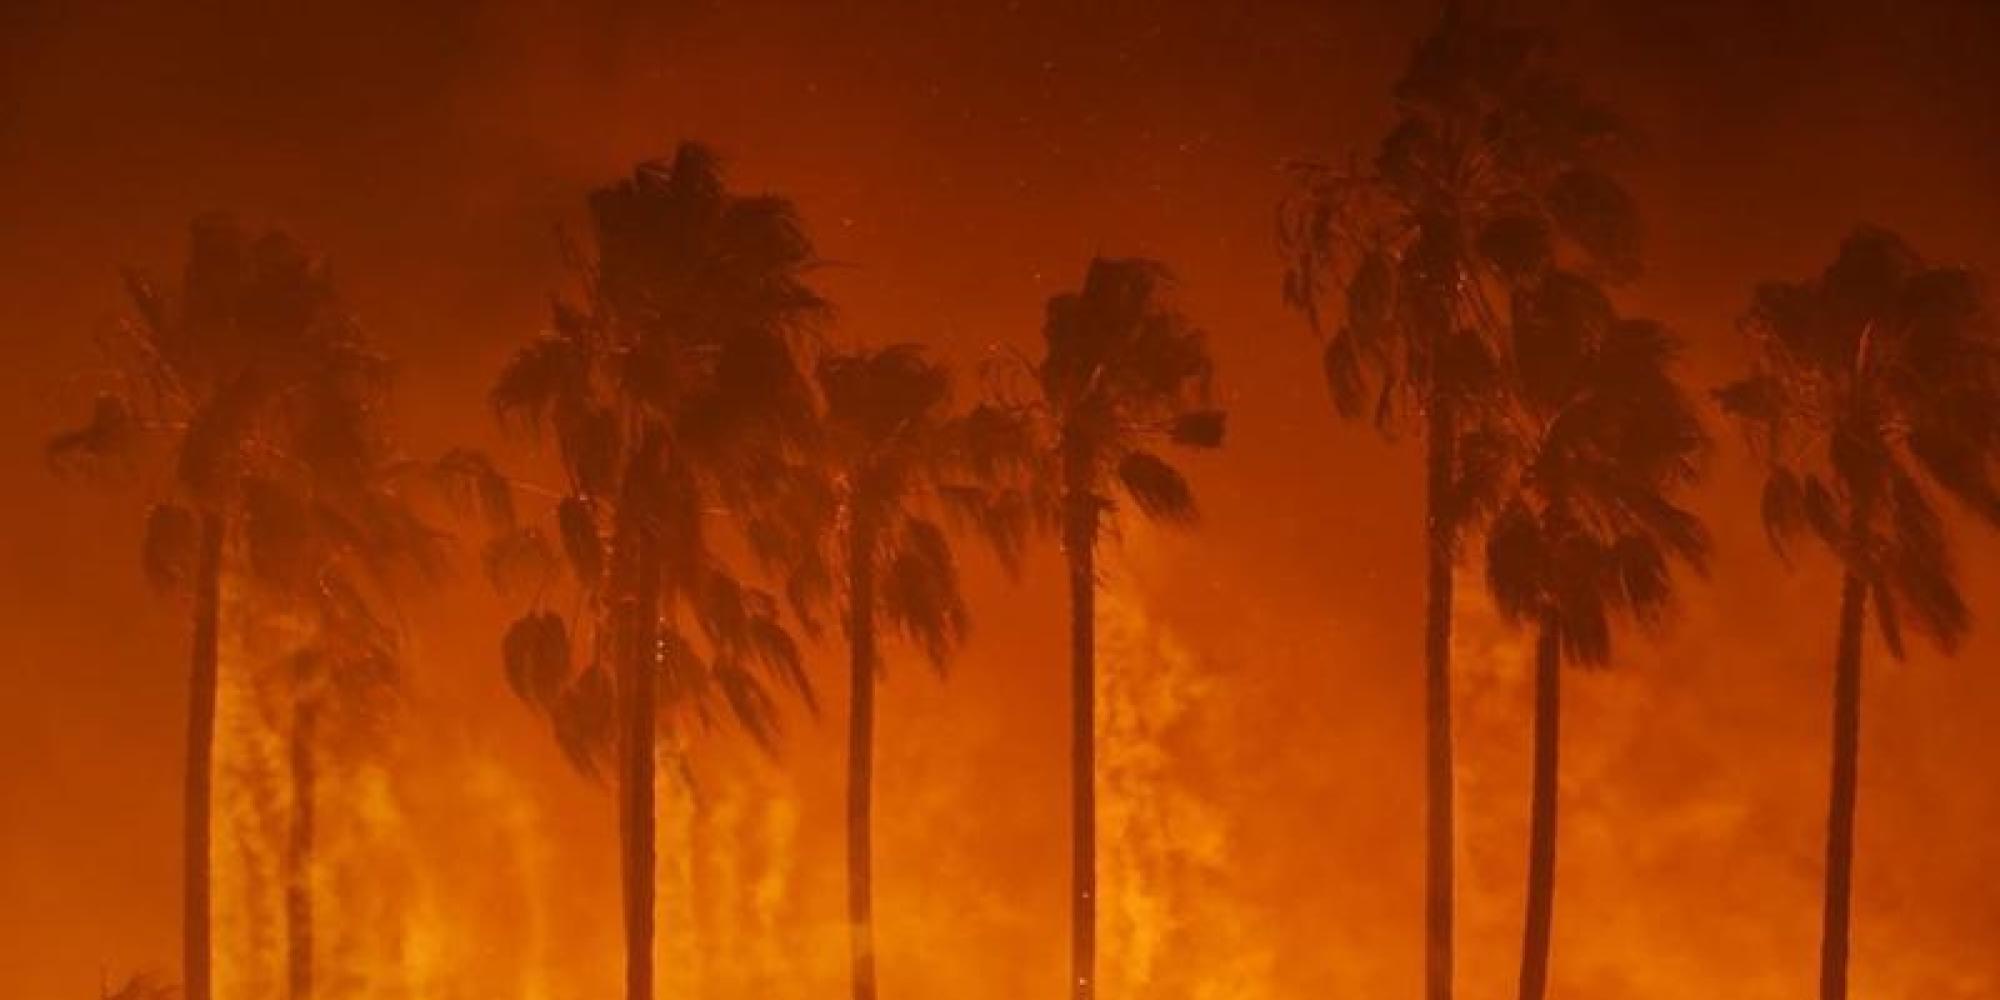 Southern California’s latest wildfires rage with little progress reported